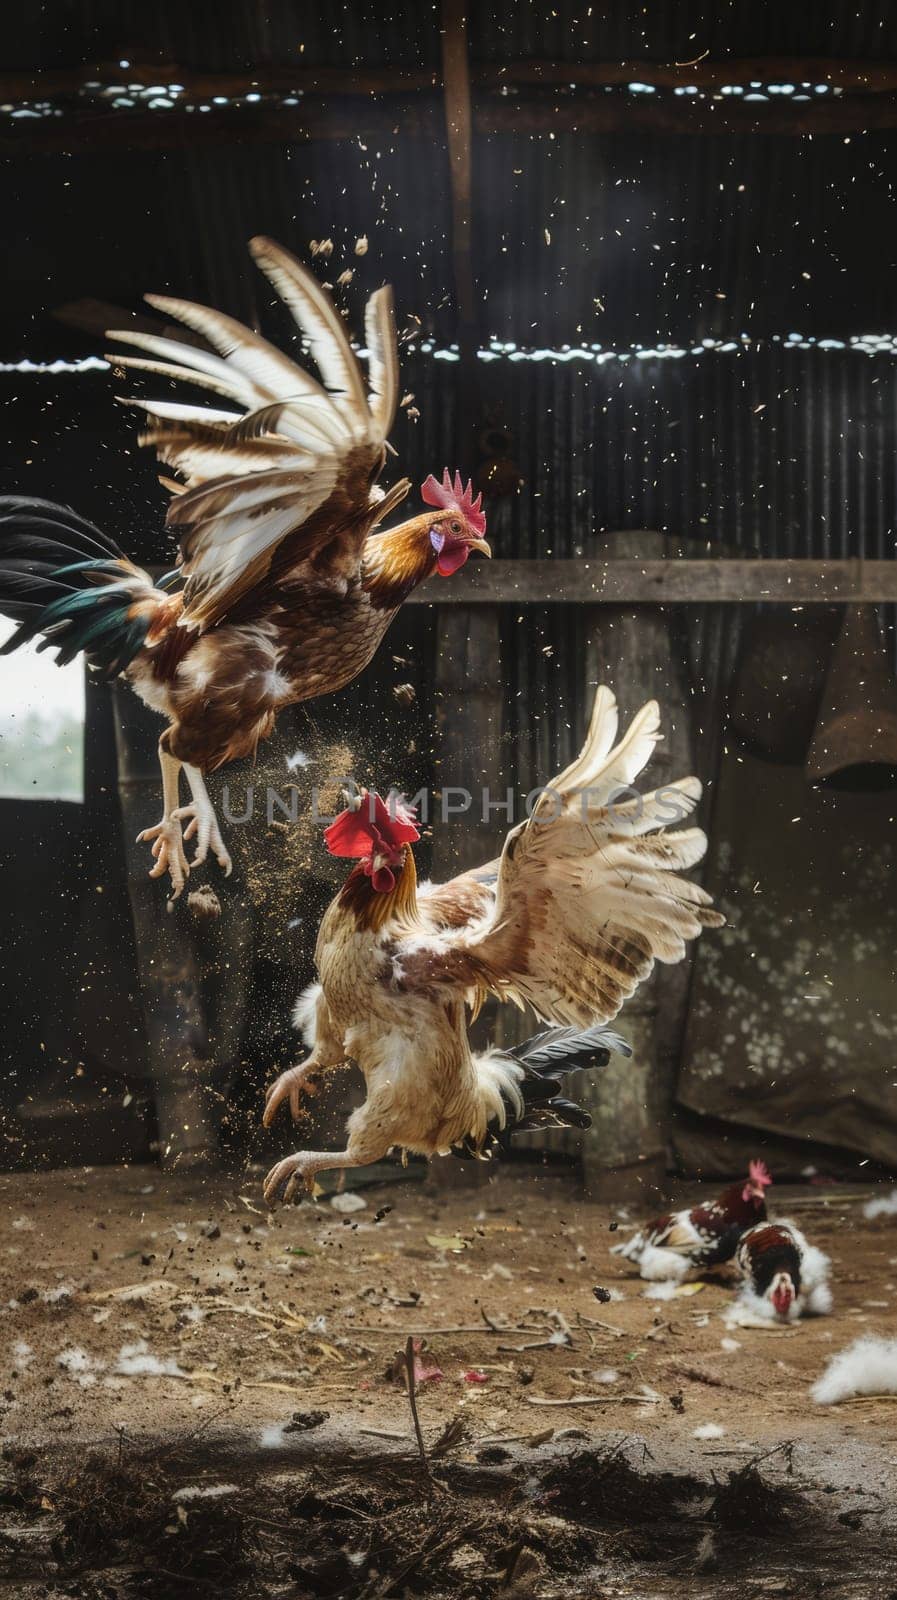 Two roosters in mid-air combat, feathers flying, inside a rustic barn with sunlight streaming through gaps. by sfinks